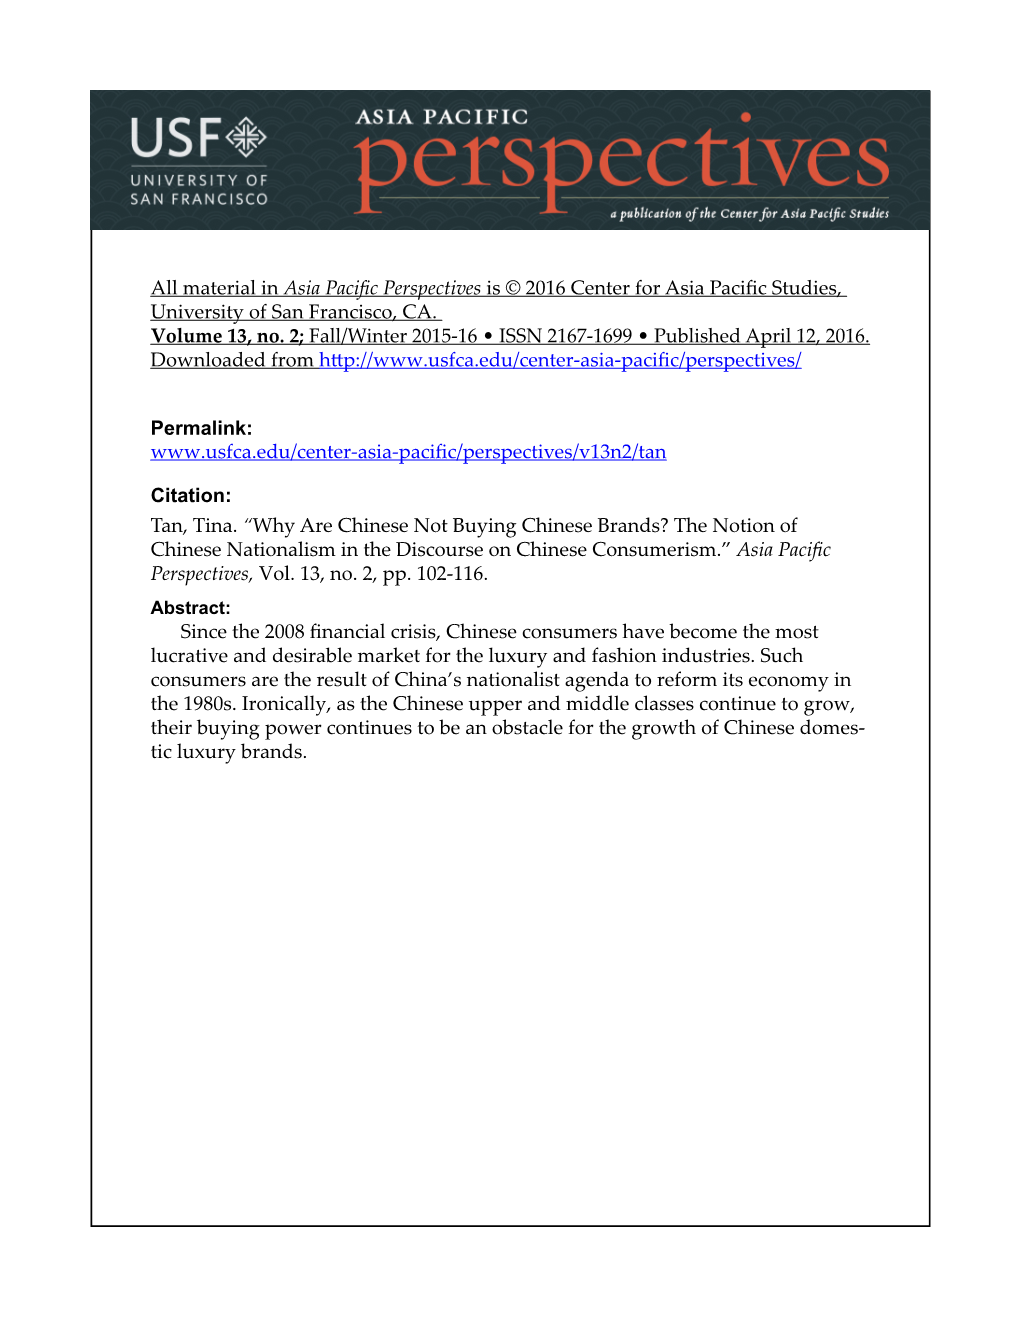 Material in Asia Pacific Perspectives Is